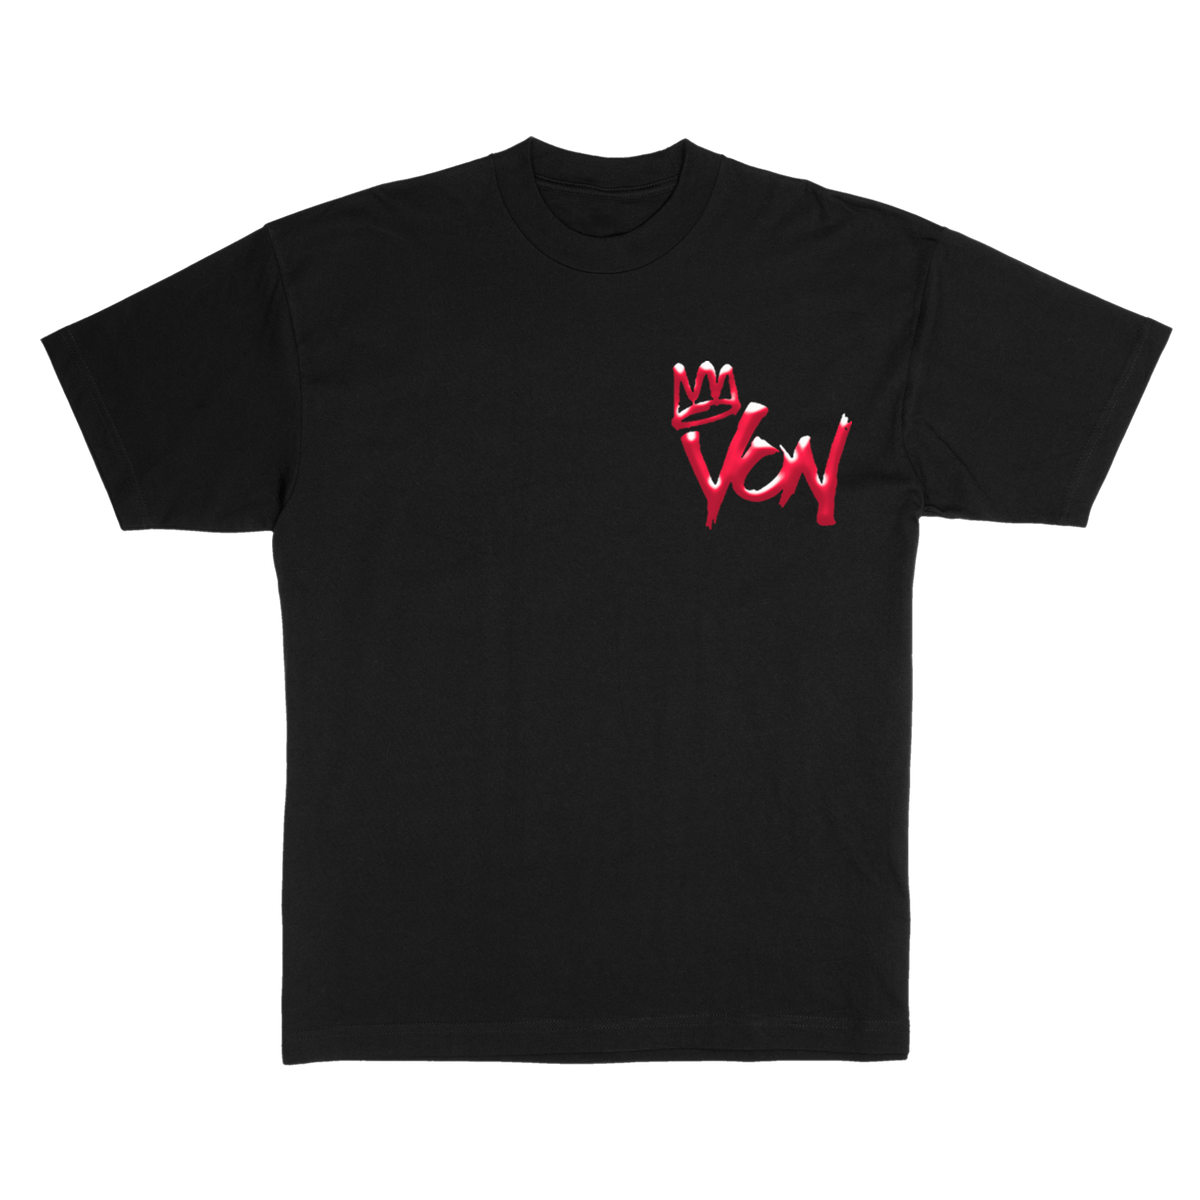 Top of The World Tee Black – KING VON OFFICIAL MERCH